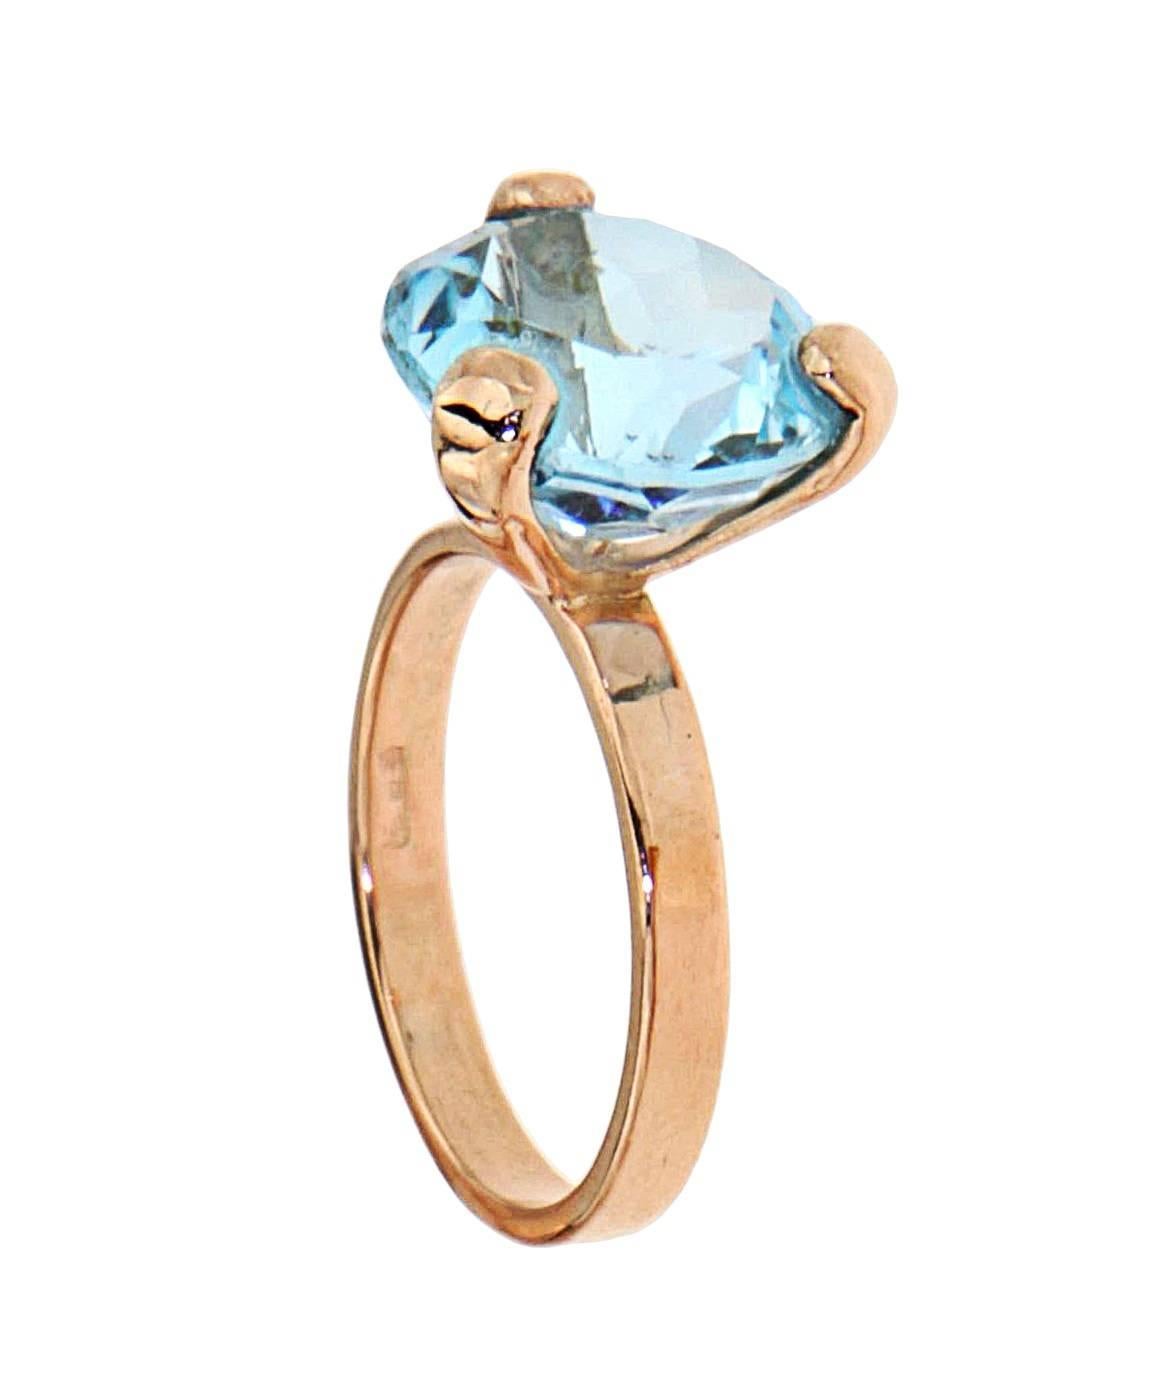 Pair of  Rose Gold 9 carat ring with blue topaz and violet amethyst 12 mm / 0.472441 inches
Finger size 6 1/2 can be resized